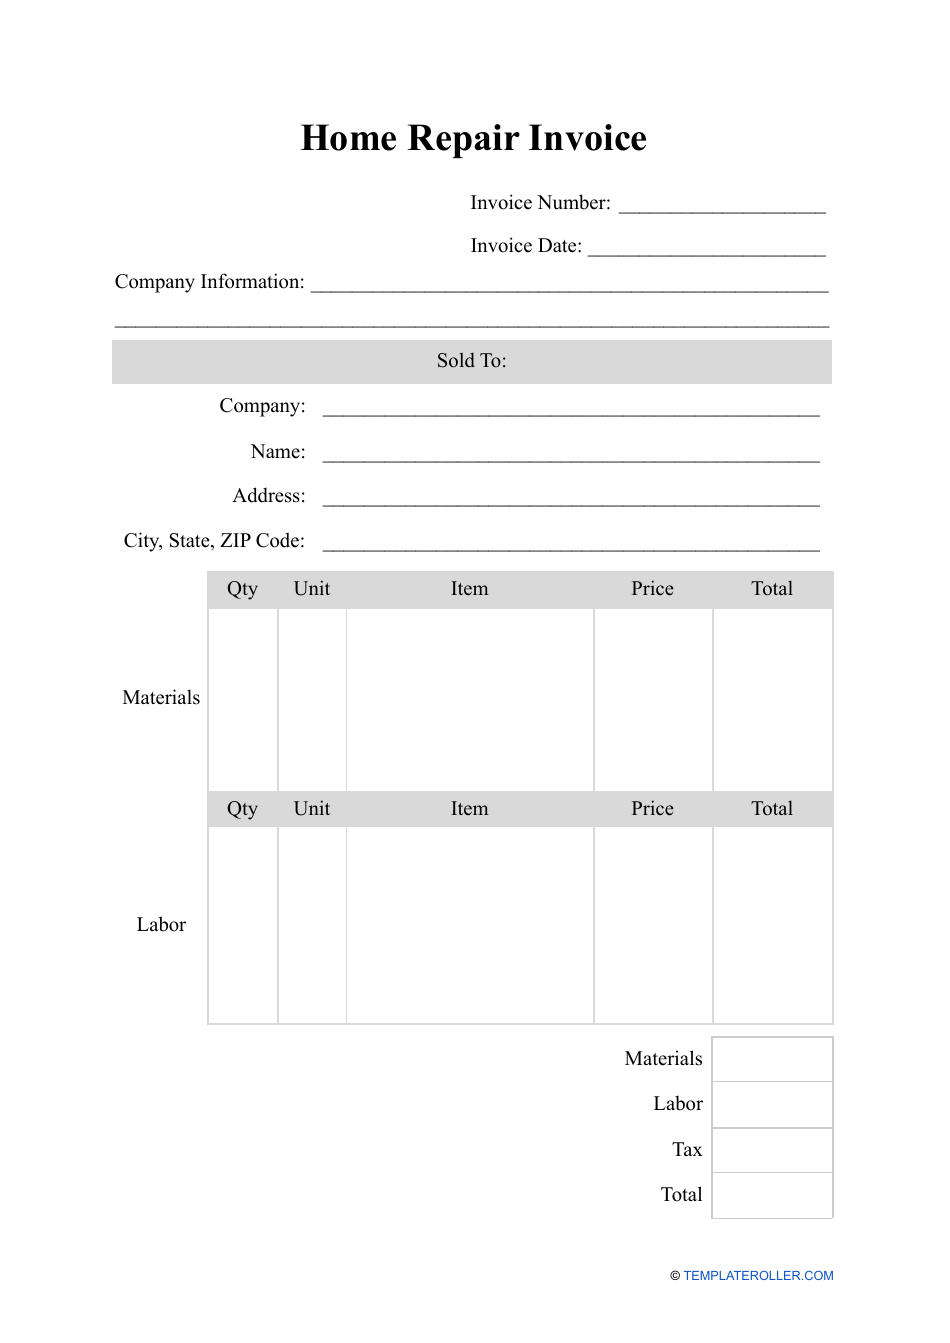 home-repair-invoice-template-fill-out-sign-online-and-download-pdf